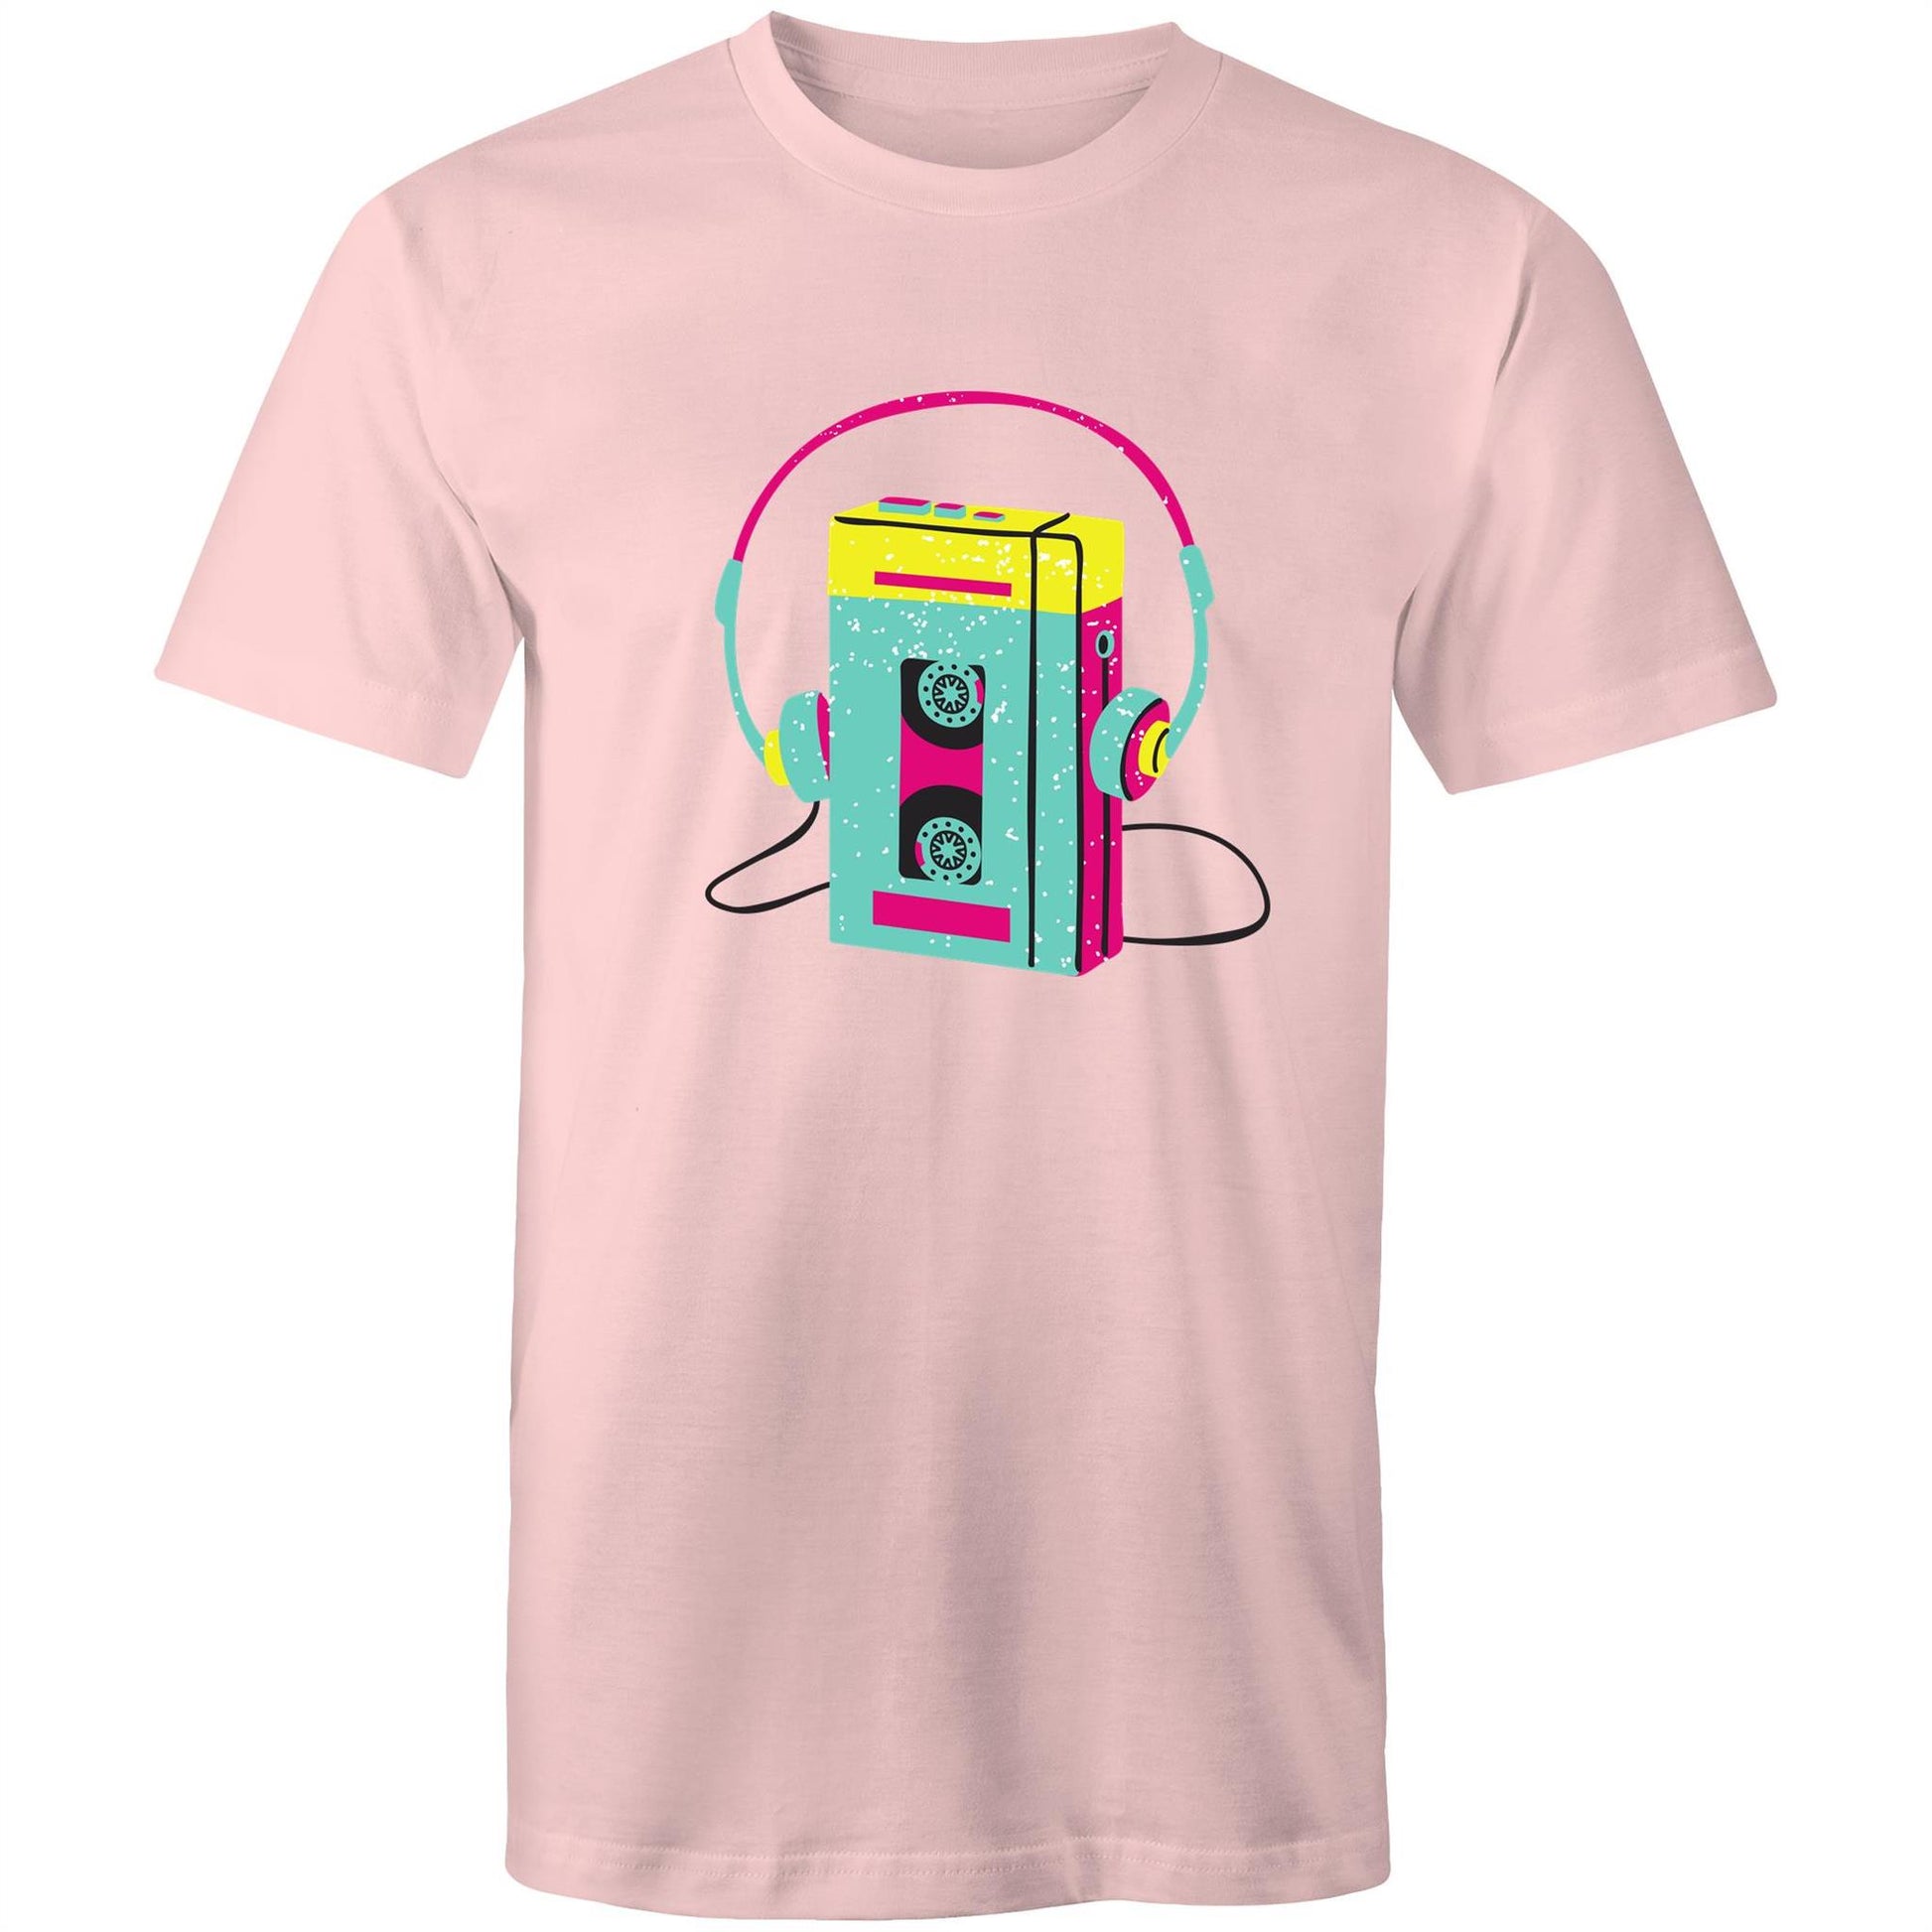 Wired For Sound, Music Player - Mens T-Shirt Pink Mens T-shirt Mens Music Retro